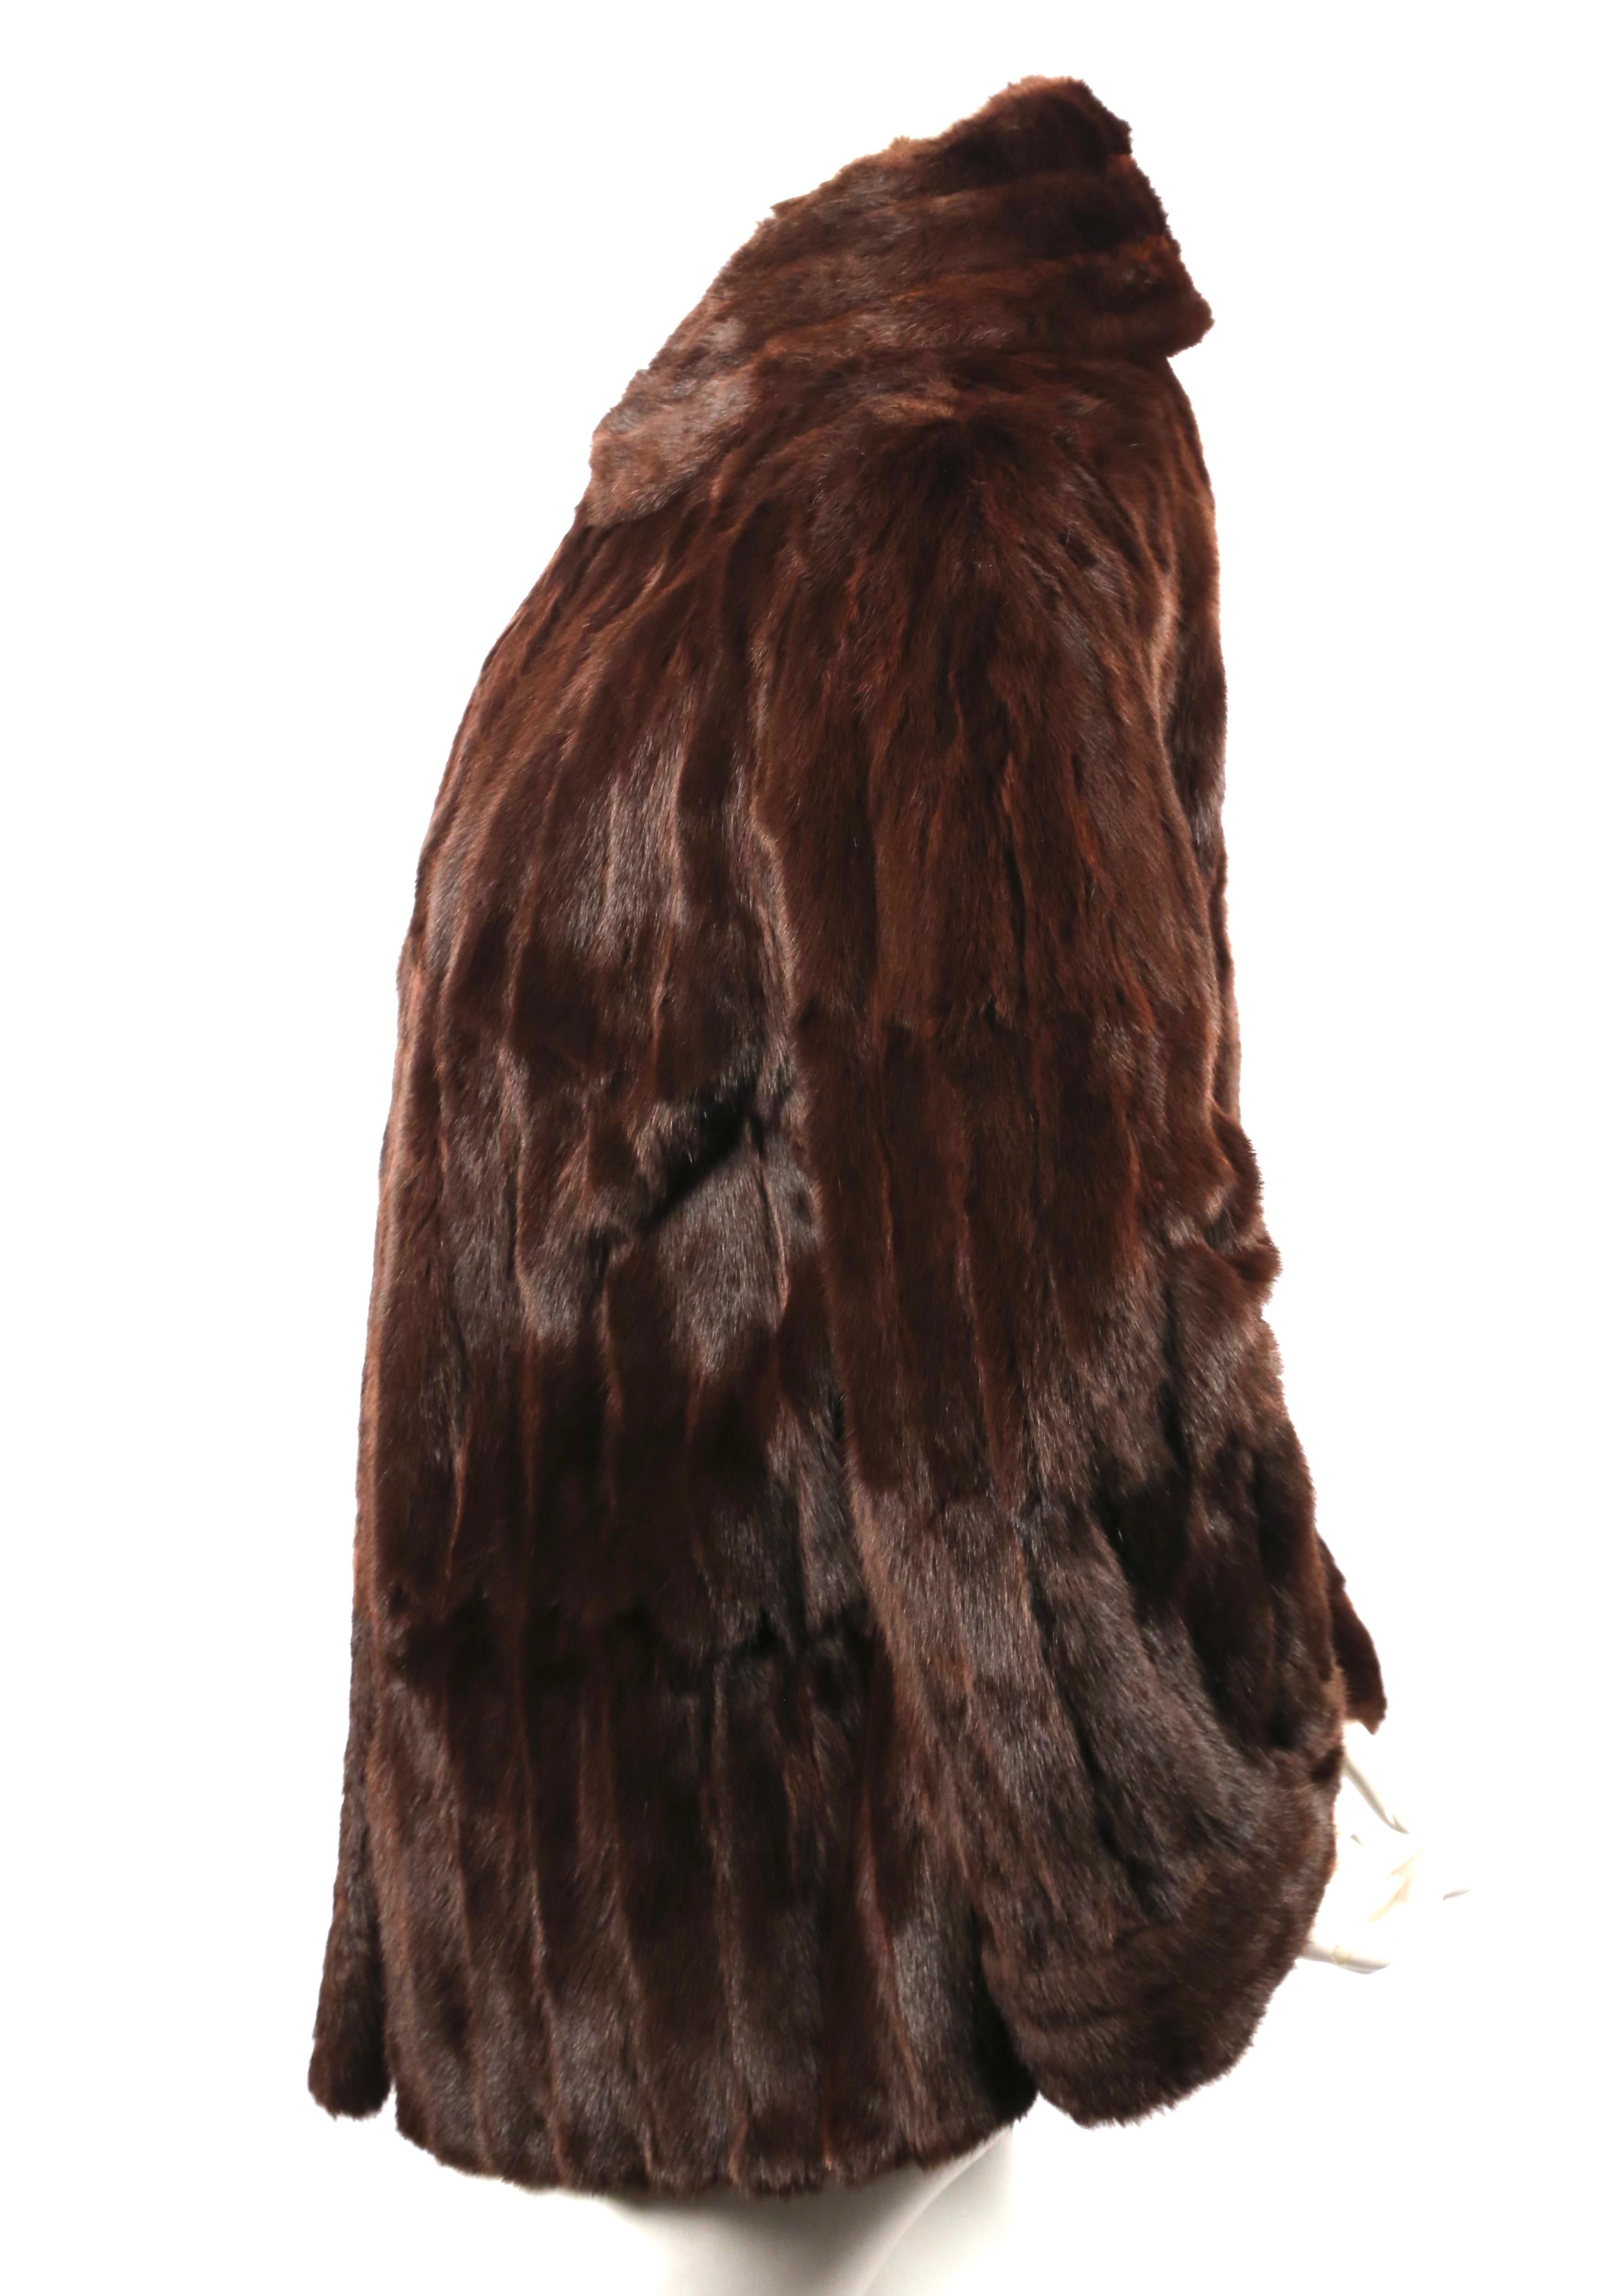 Rich brown French lapin fur coat from Thierry Mugler dating to the early 1990's. Fits a size small or medium. Hook closure. Fully lined. Made in France. Very good condition.
